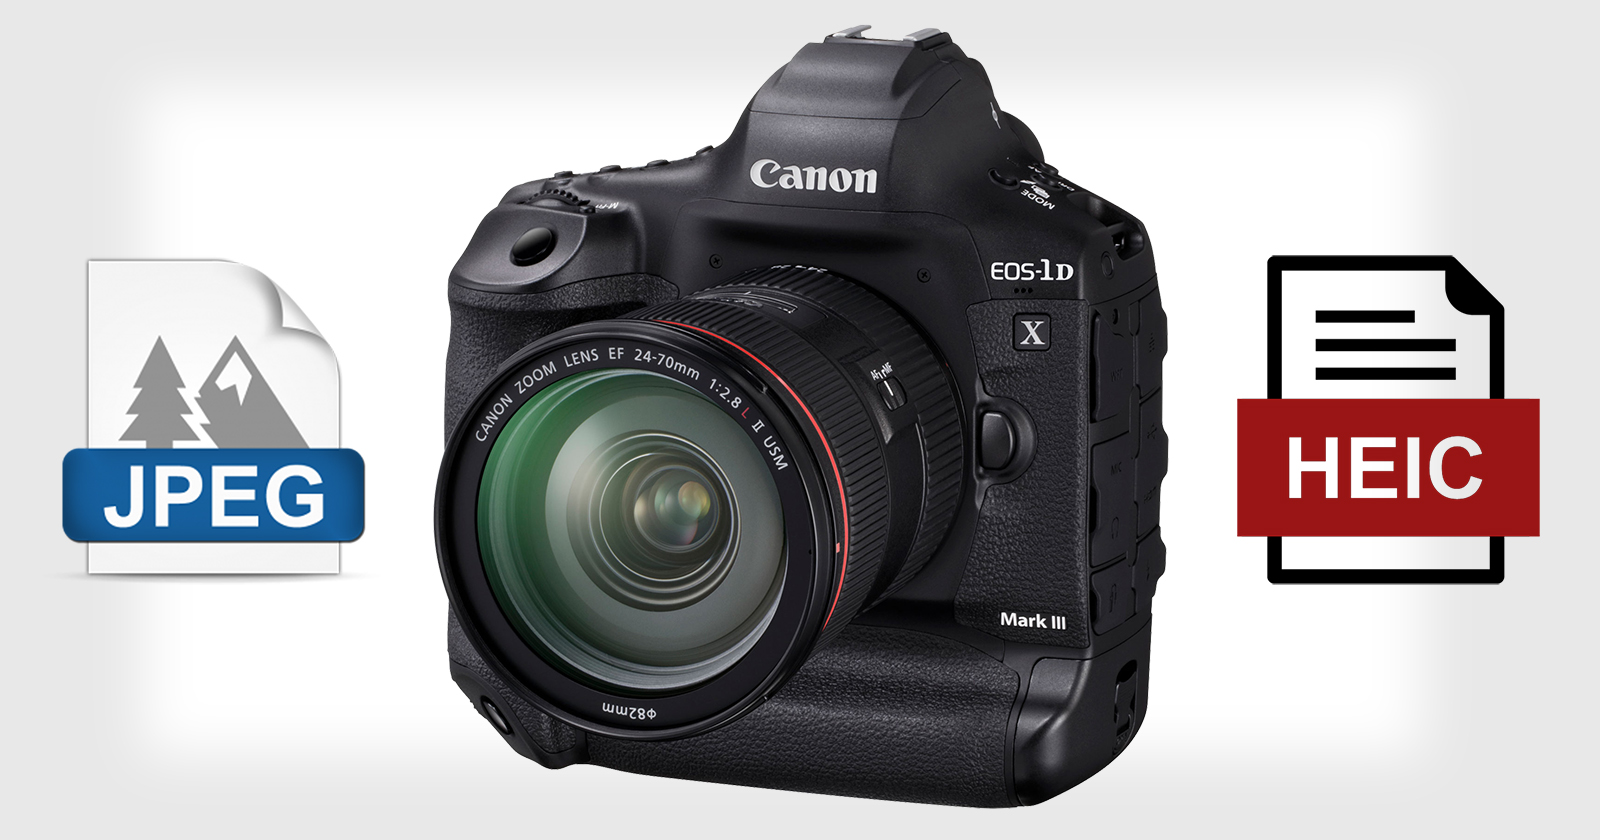 Canon Has Moved On to HEIF, But Wont Ditch JPEG Completely Yet